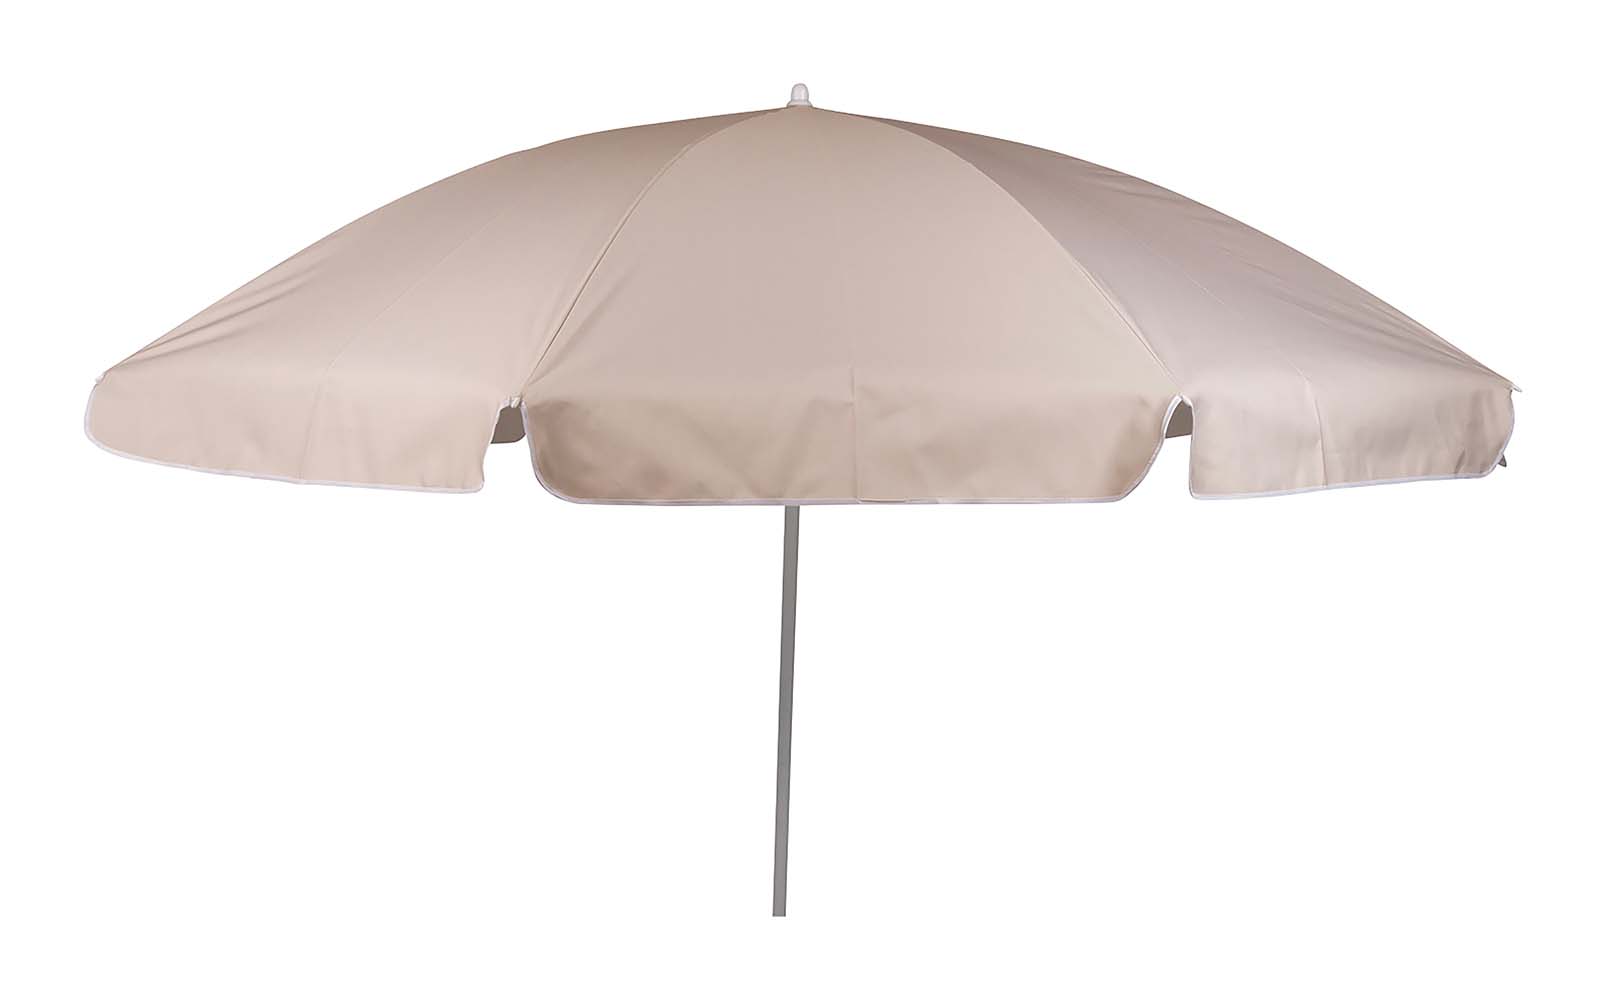 7267246 A stylish and sturdy steel frame parasol. The 160 gr/m² polyester fabric provides protection against harmful solar radiation. The pole has an articulated arm to allow the parasol to bend depending on the direction of the sun. The parasol pole has a 25 mm diameter.